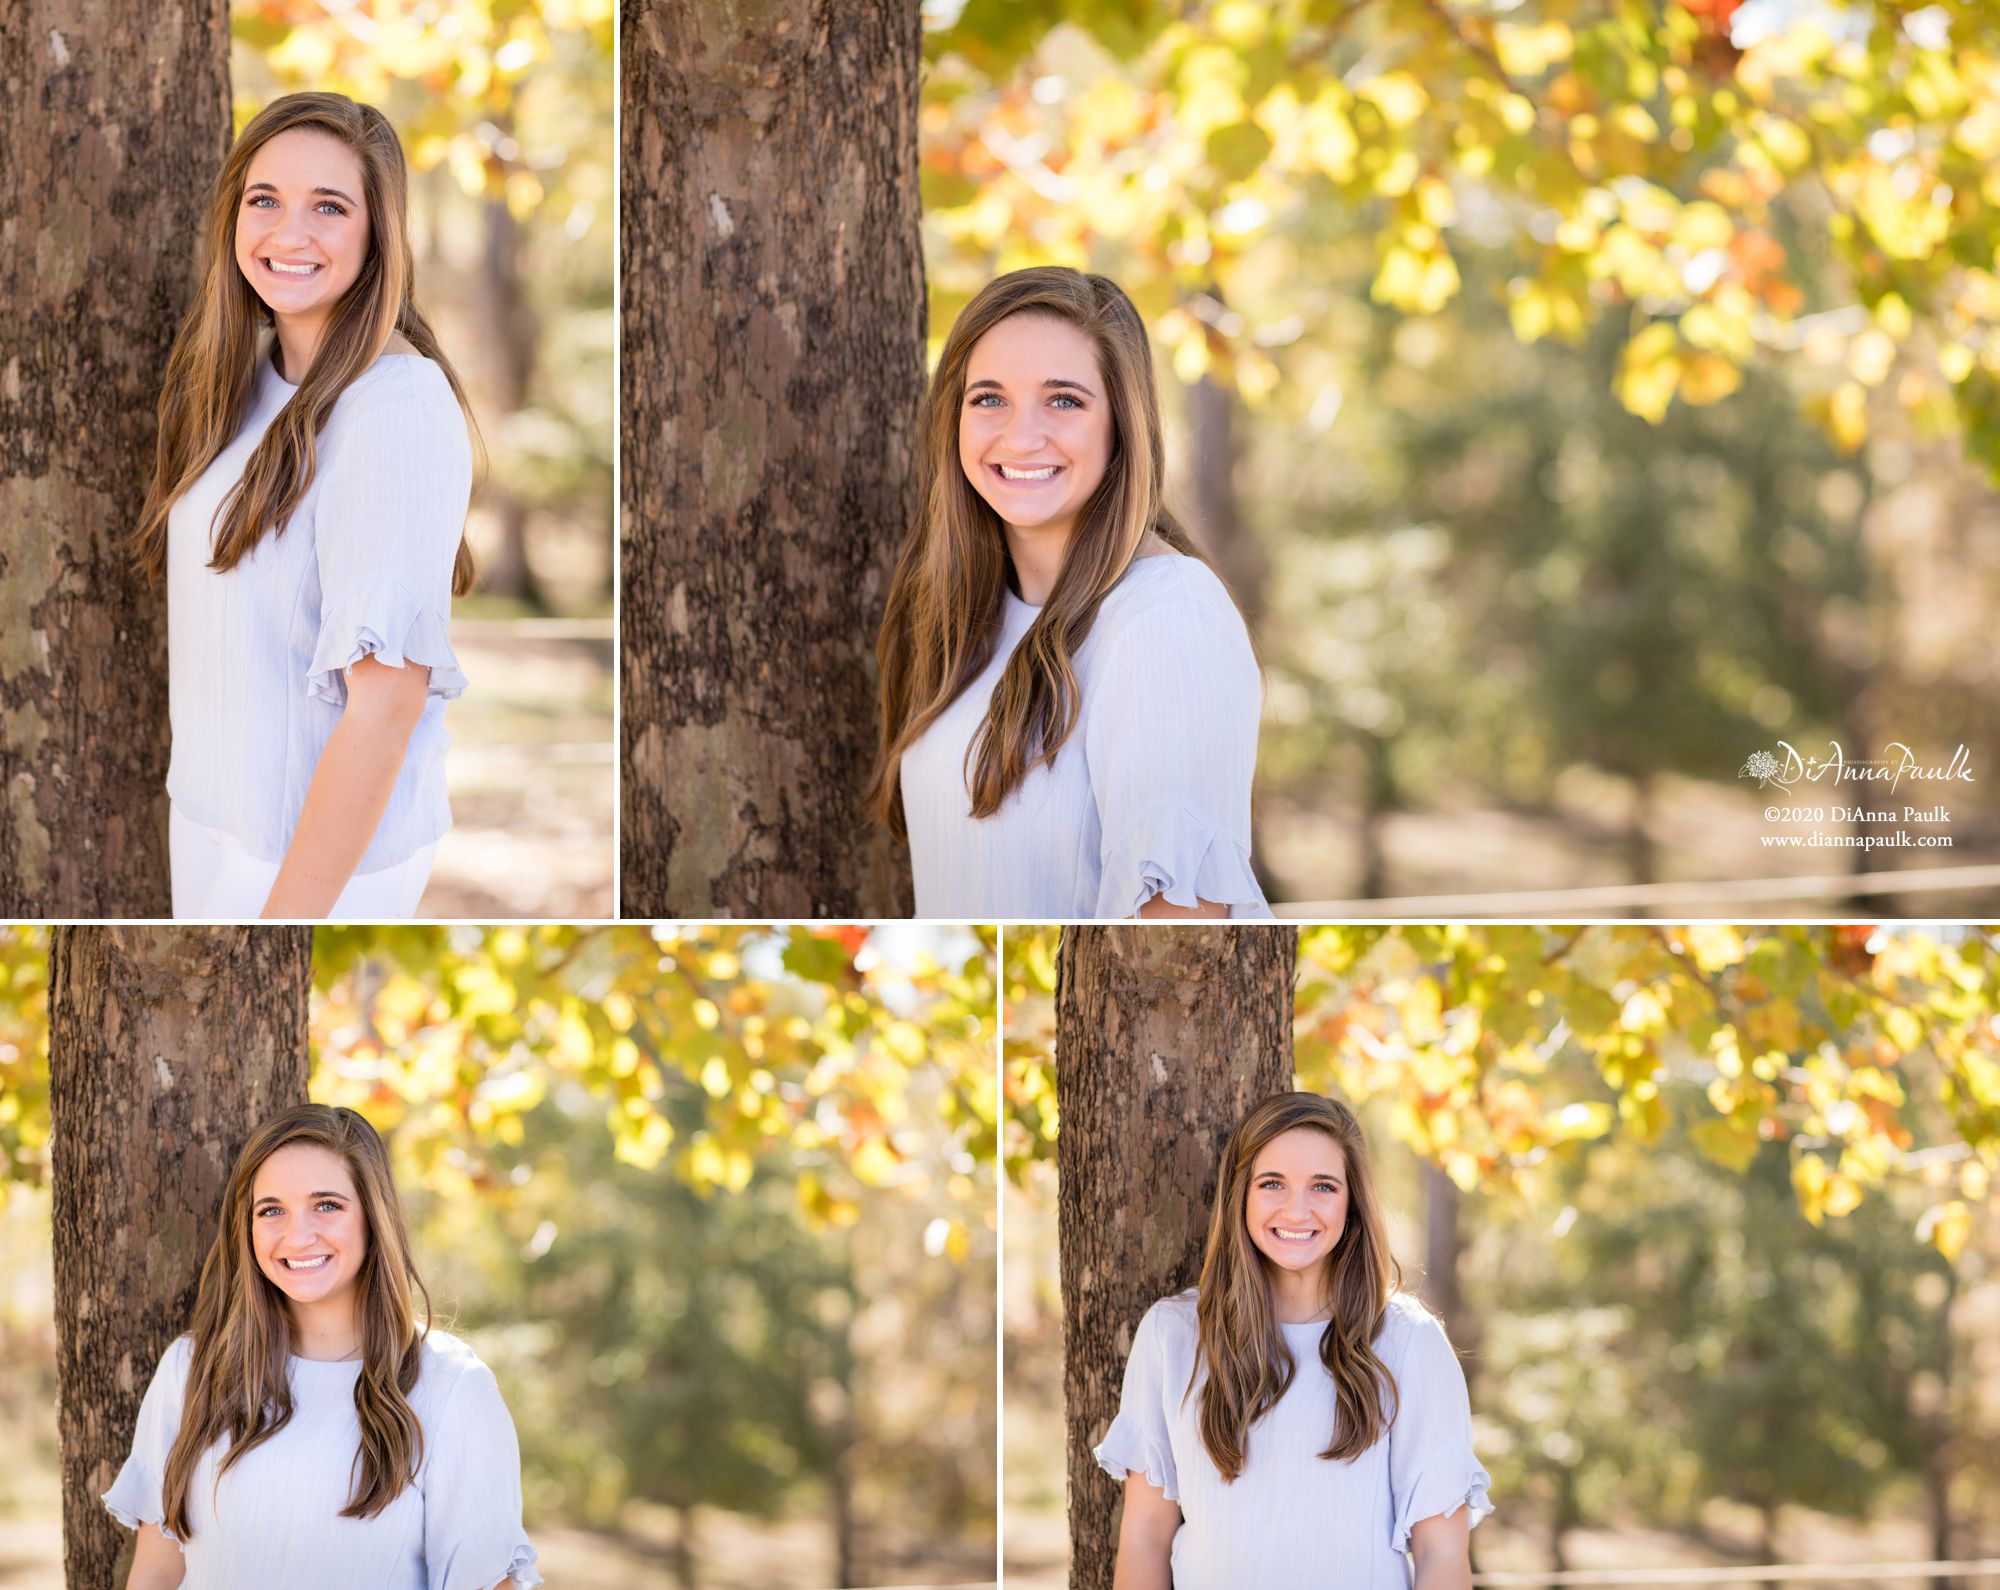 Senior session at Russell Crossroads; Photography by DiAnna Paulk, M. Photog., CPP, central Alabama